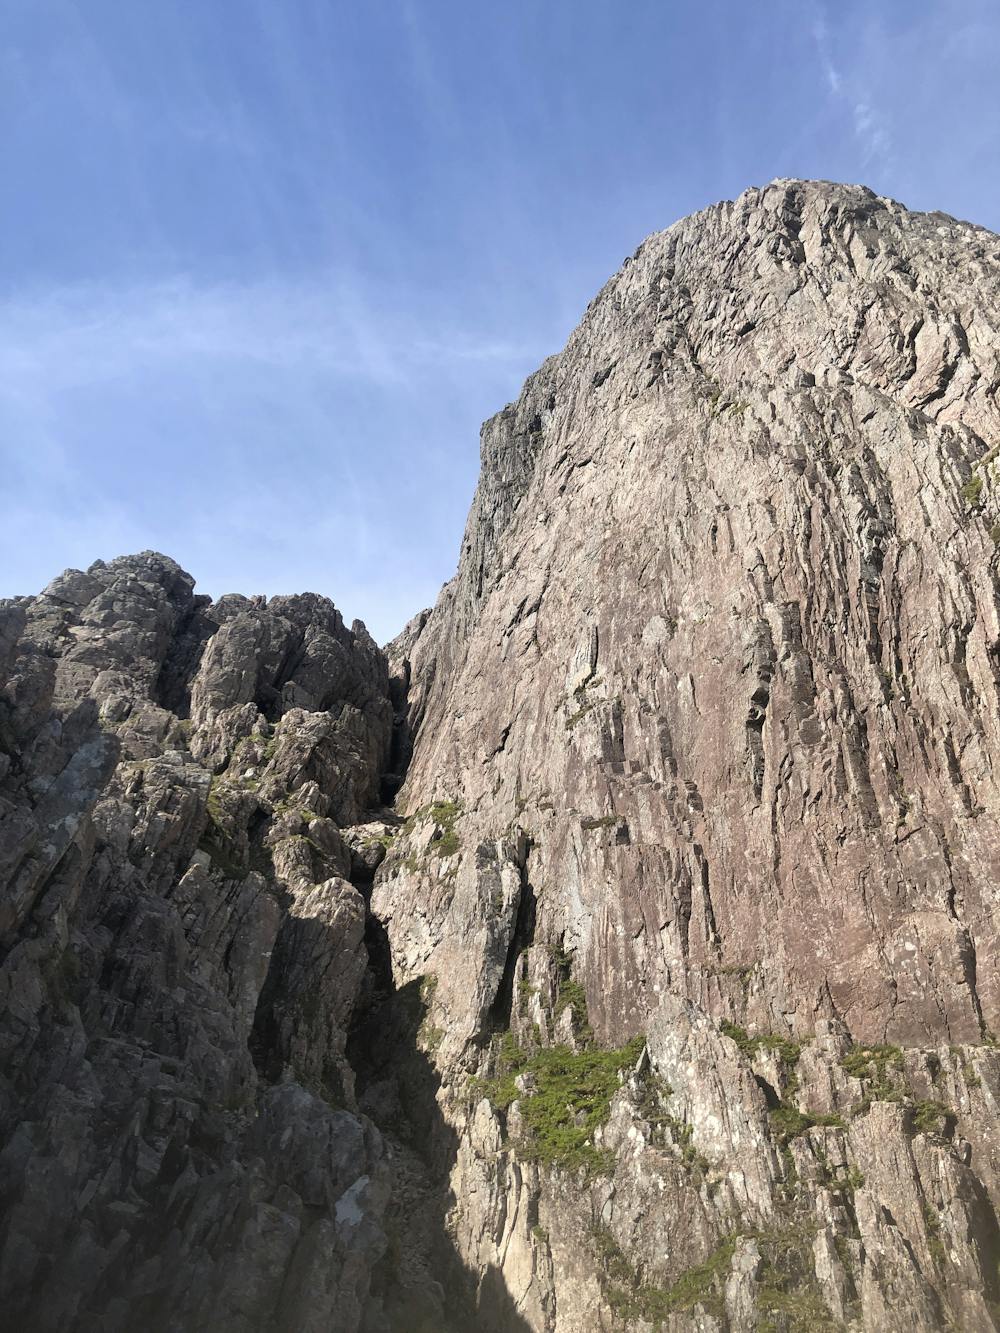 Rannoch wall, offering middle grade climbs with an impressive exposure